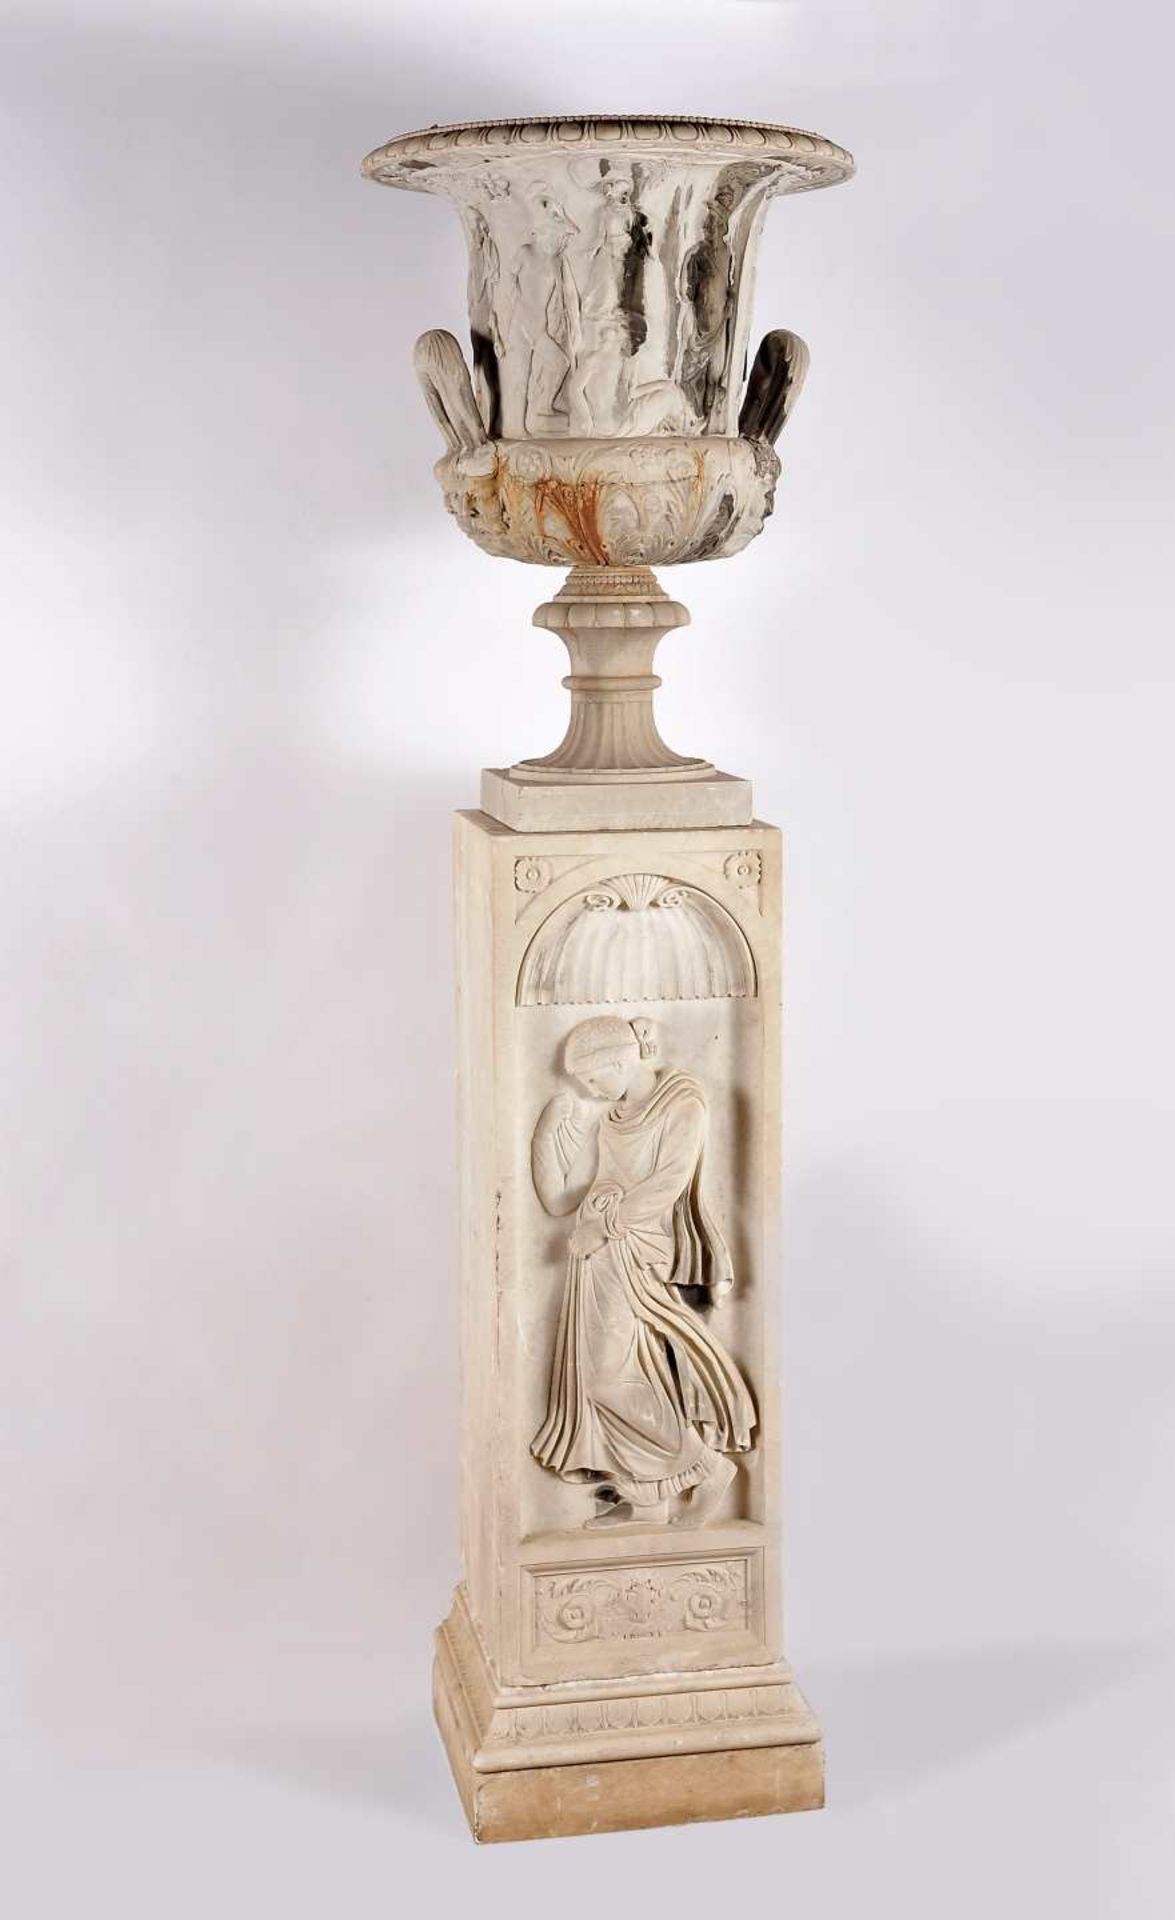 A pair of "Grand Tour" vases, Medici model, on columns - Image 12 of 12